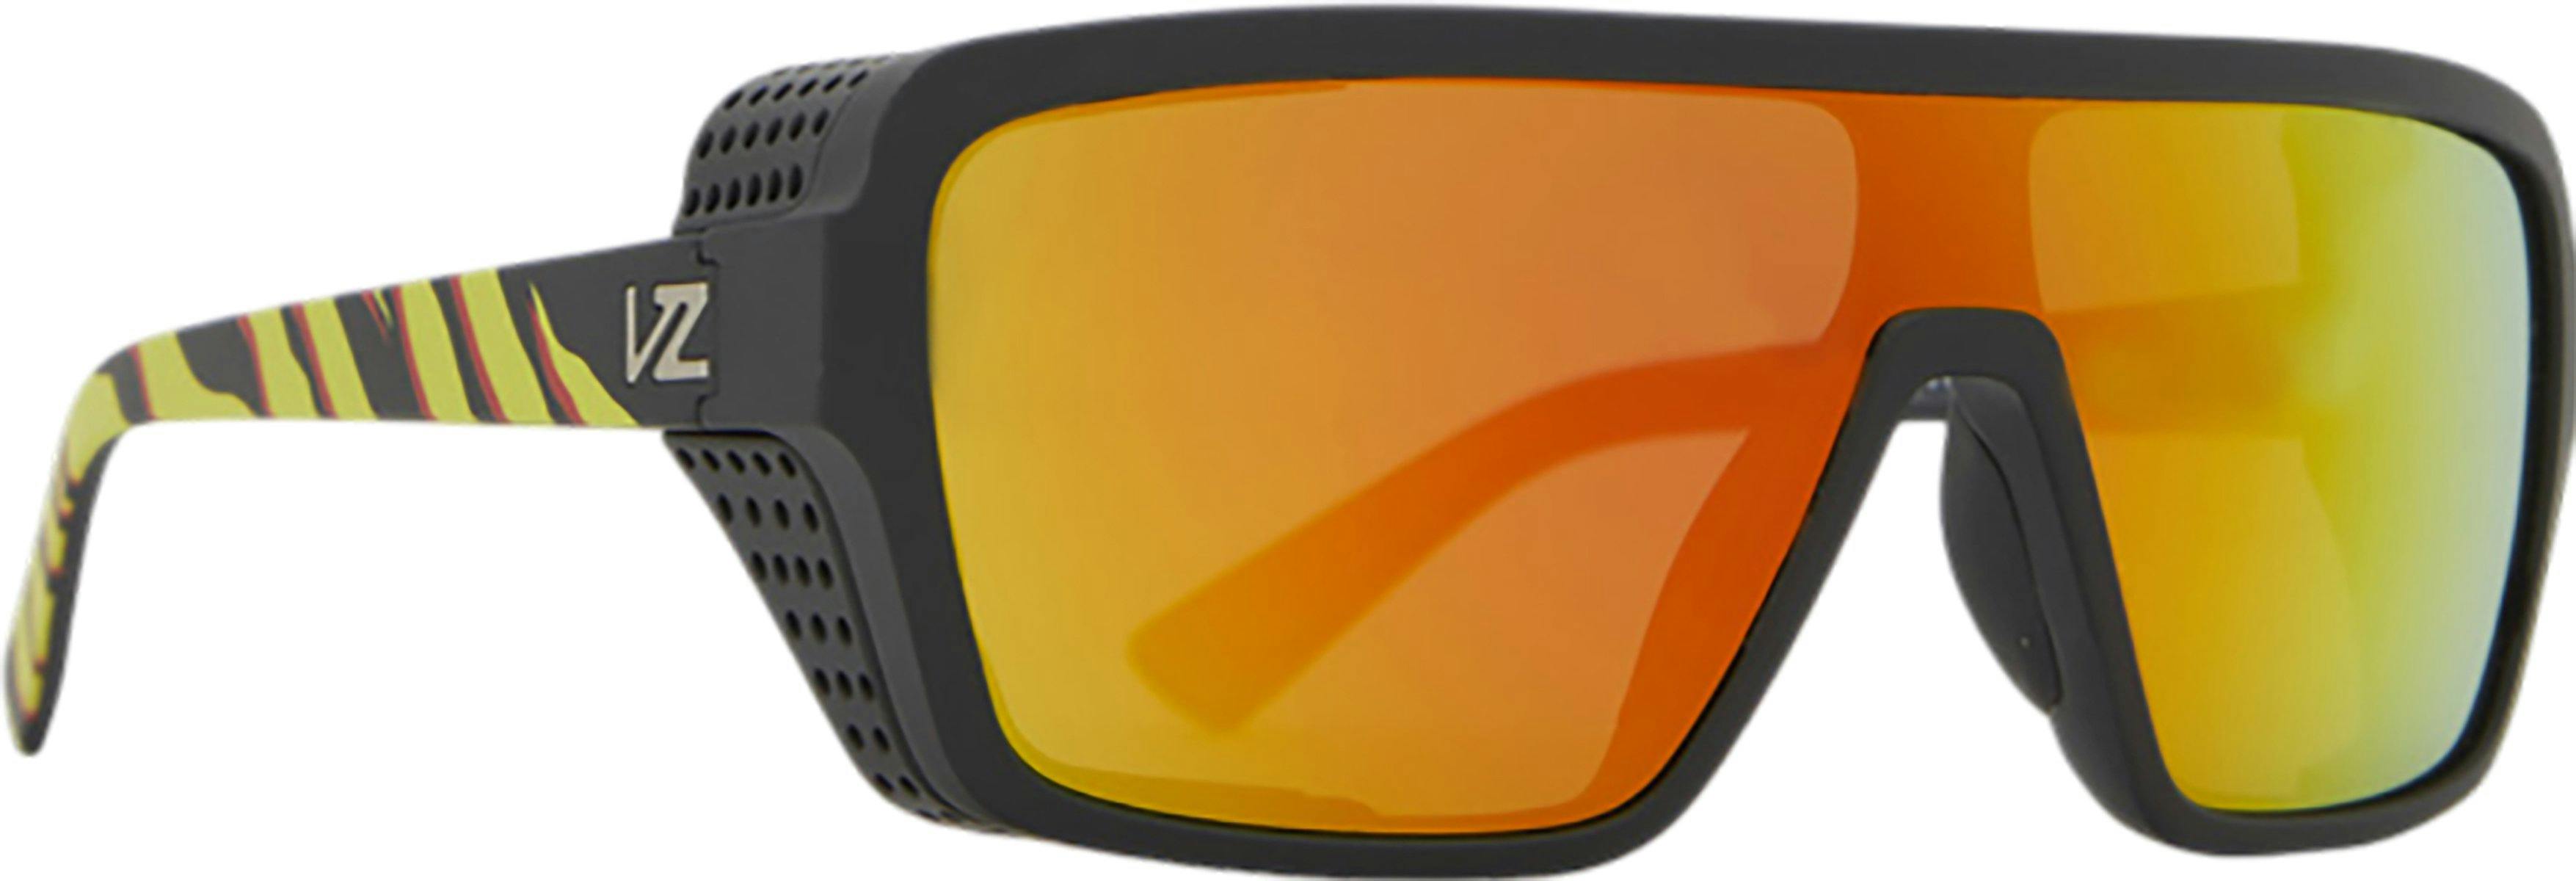 Product image for Defender Sunglasses - Unisex